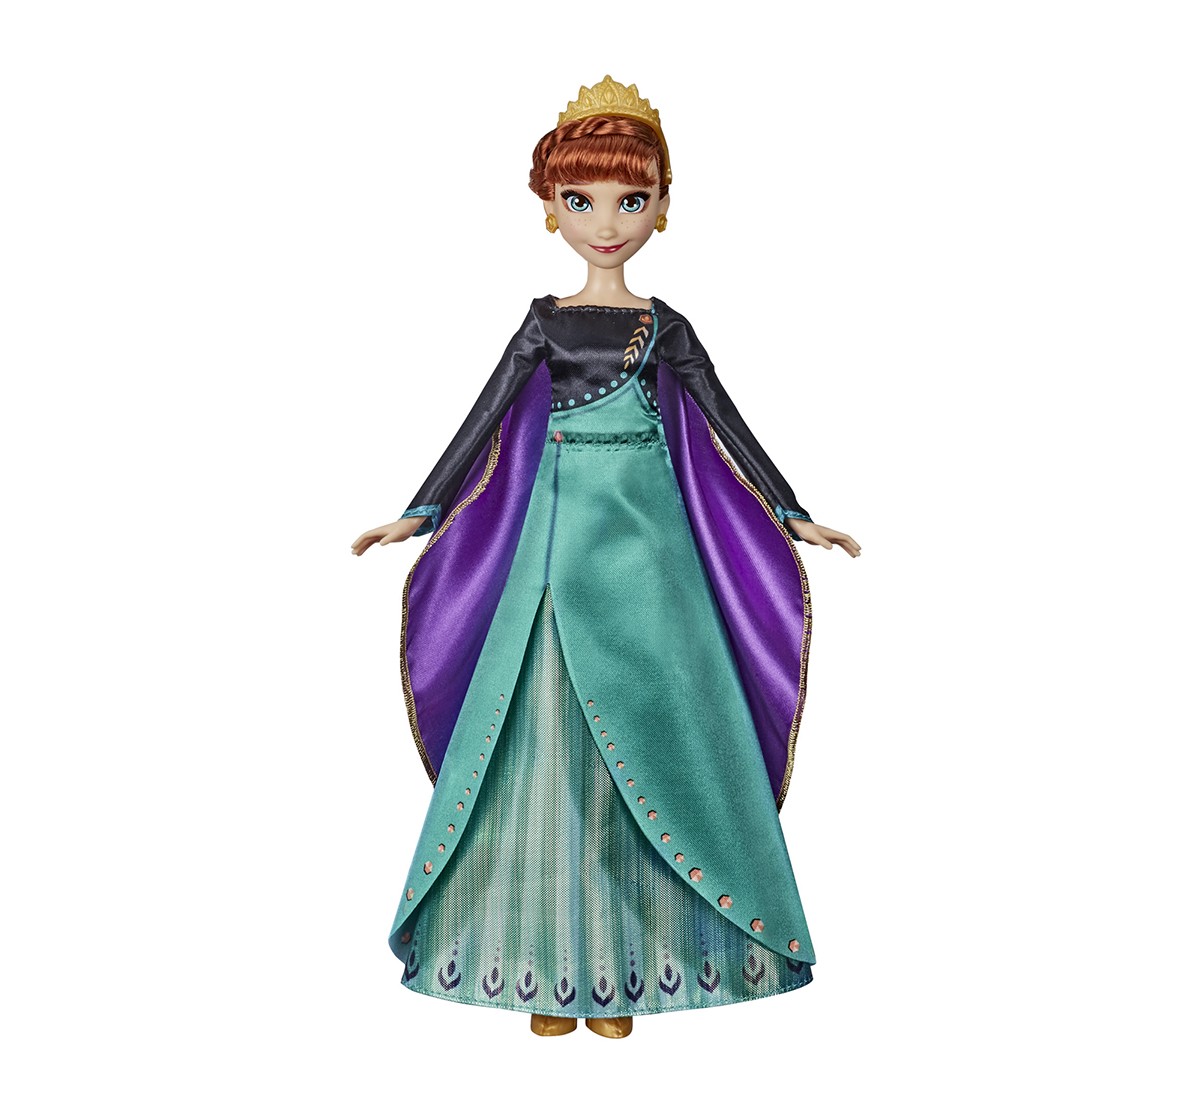 Disney Frozen Musical Adventure Anna Singing Doll, Sings "Some Things Never Change" Song from Disney's Frozen 2 Movie, Anna Toy for Kids  Dolls & Accessories for age 3Y+ 